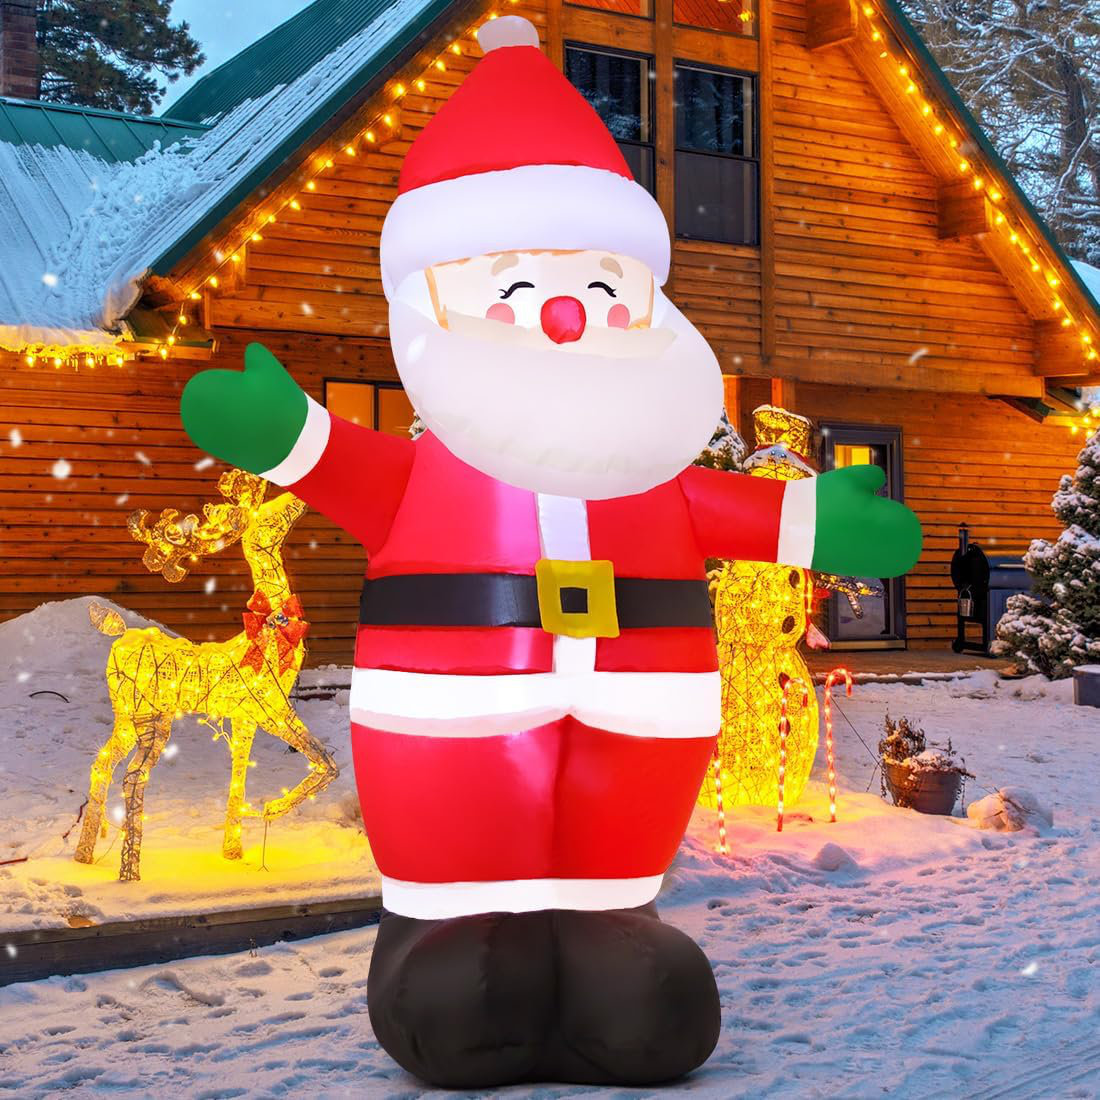 GOOSH Christmas Inflatable 5FT Inflatable Santa Claus Outdoor